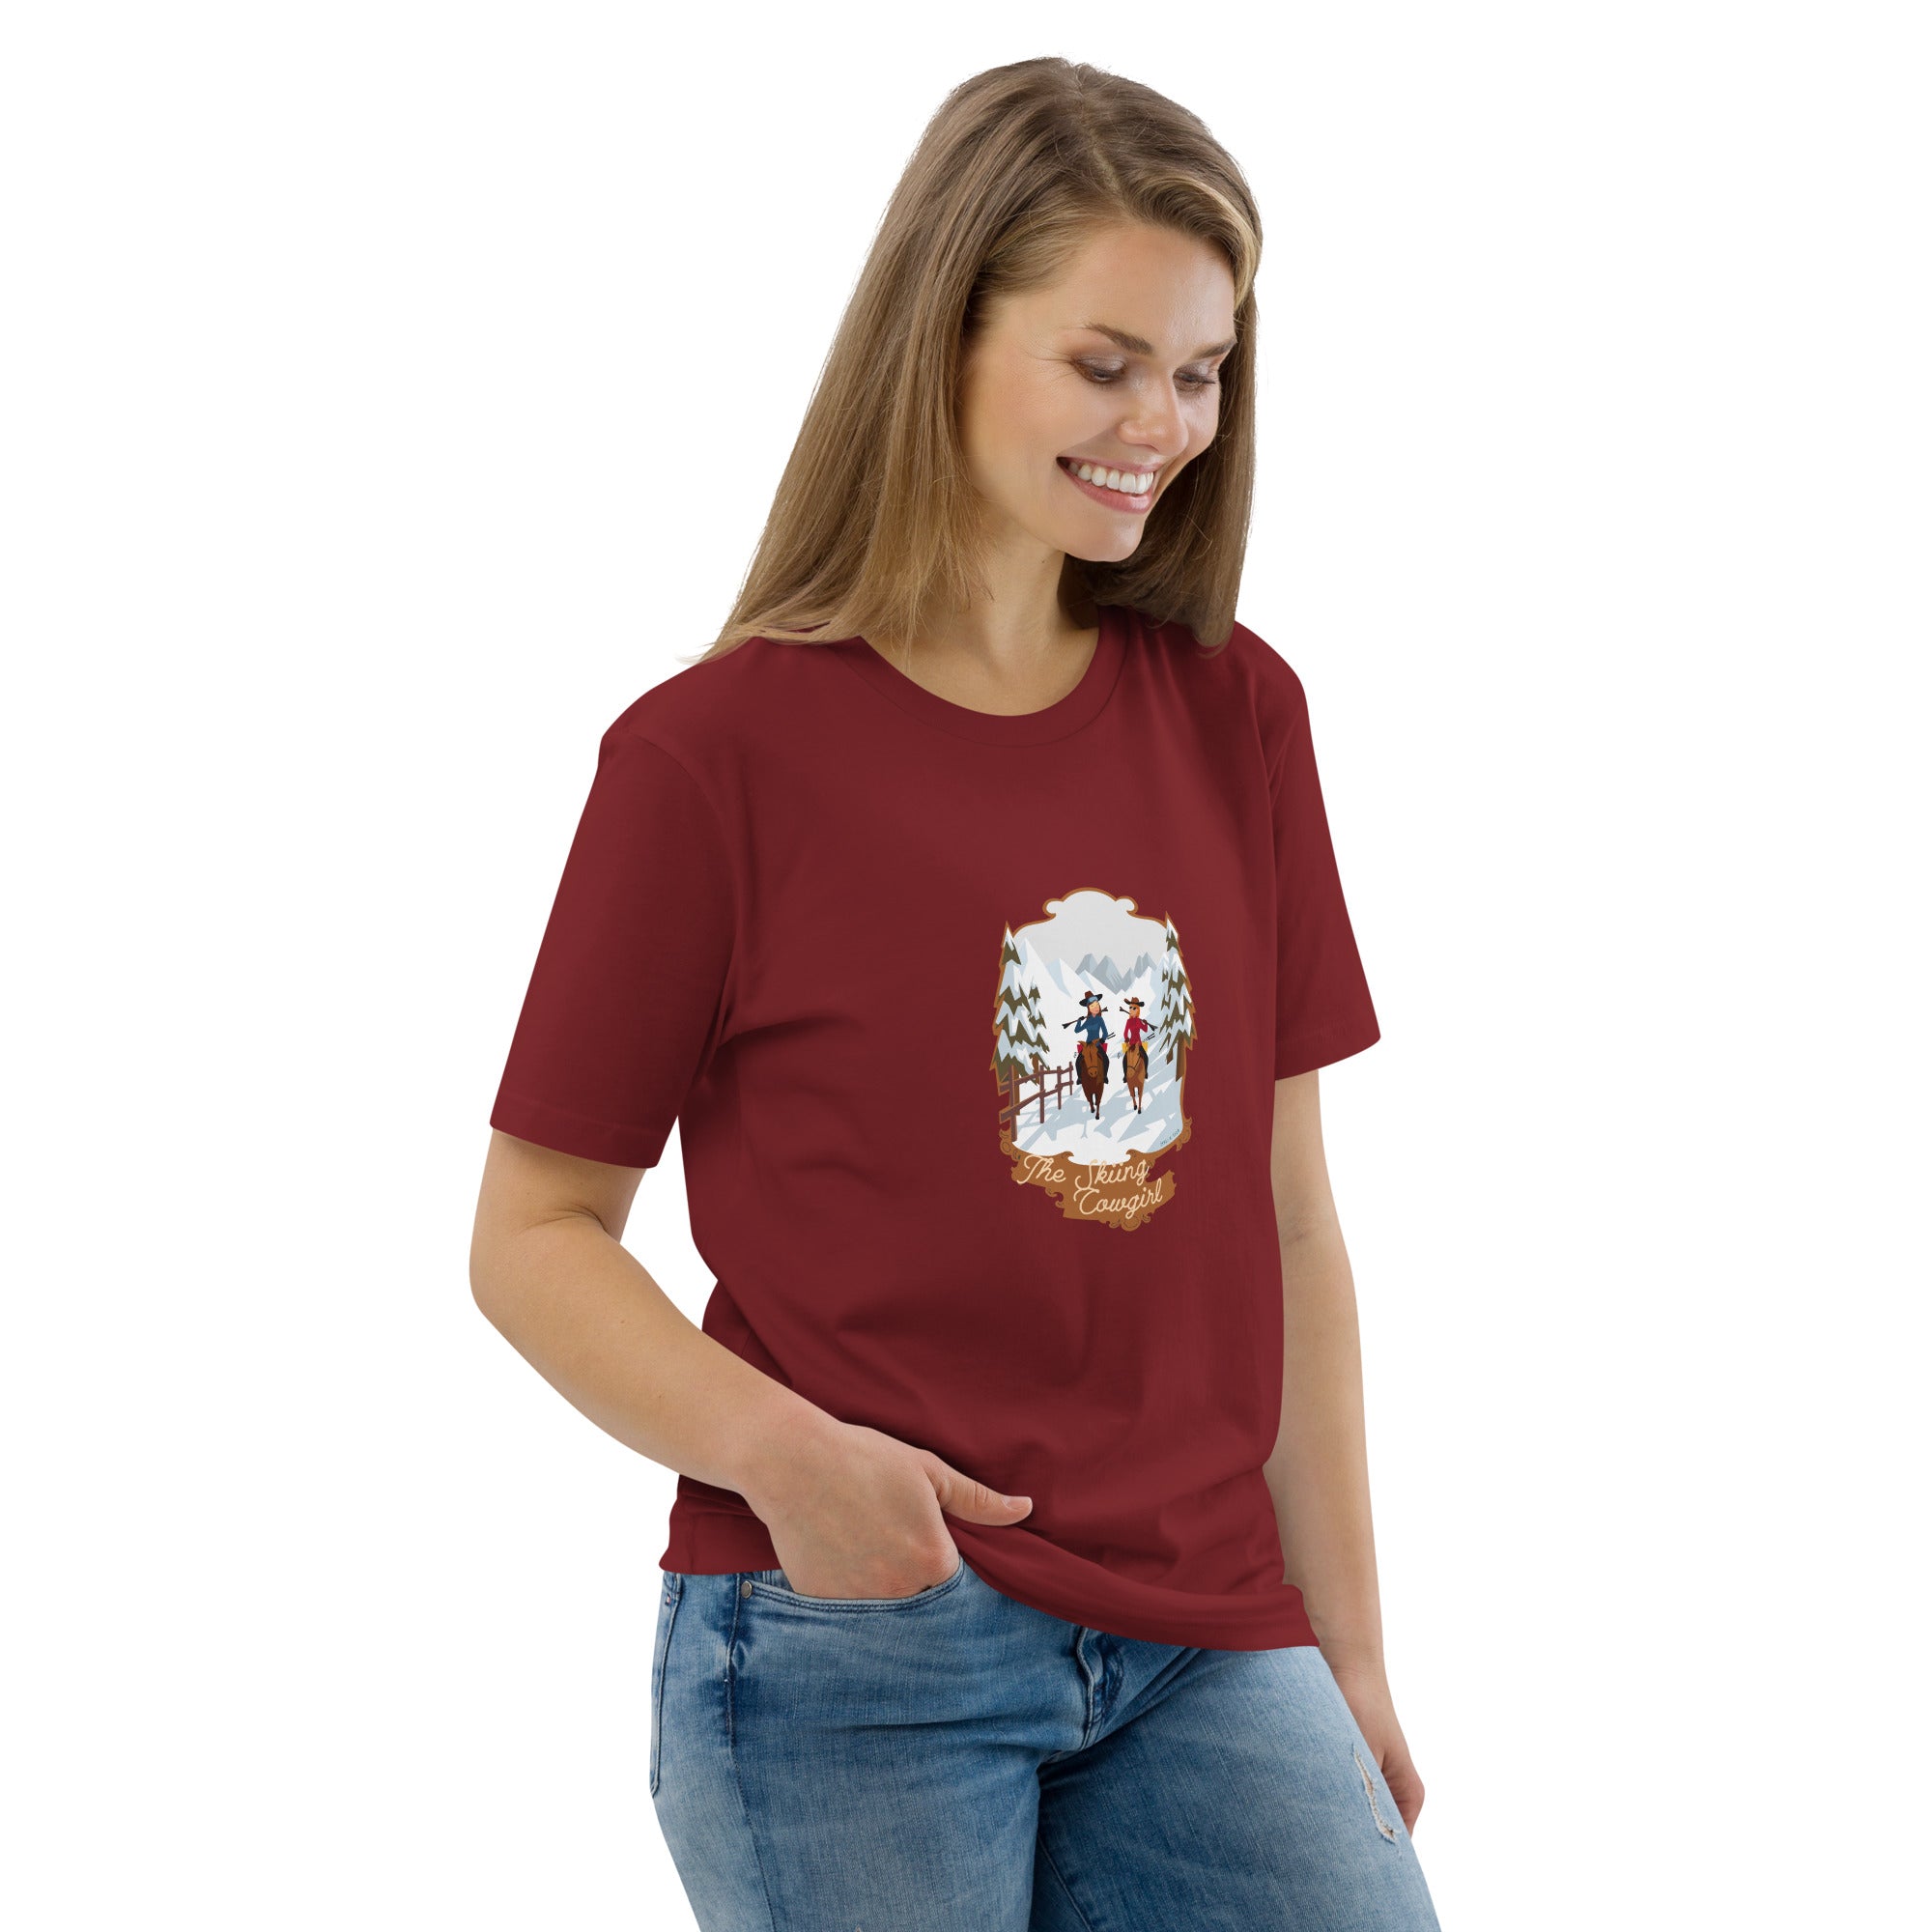 Unisex organic cotton t-shirt The Skiing Cowgirl on dark colors